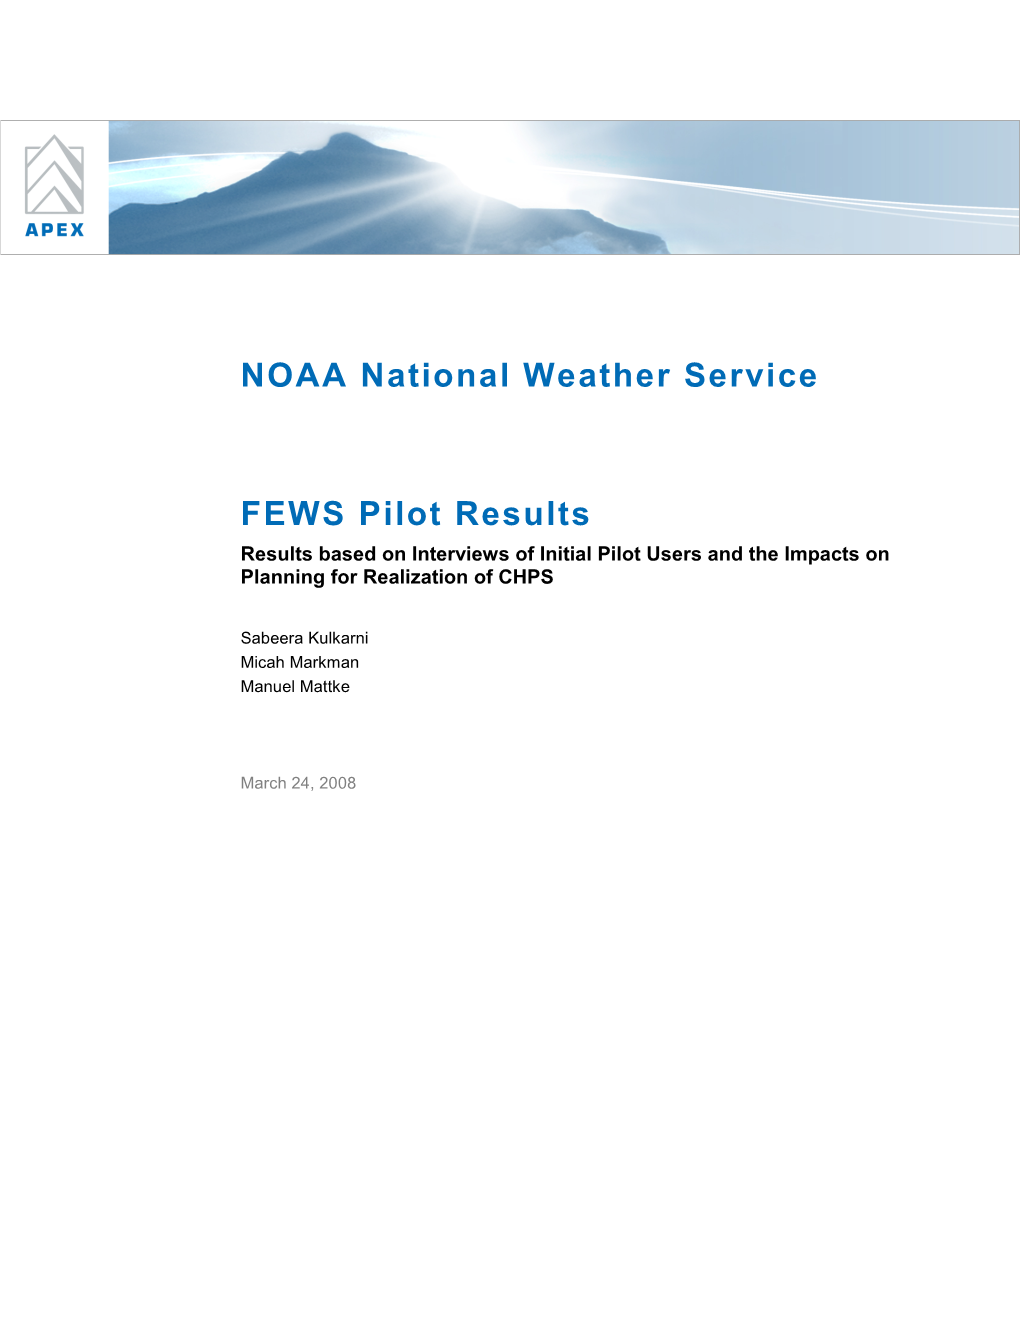 NOAA National Weather Service FEWS Pilot Results